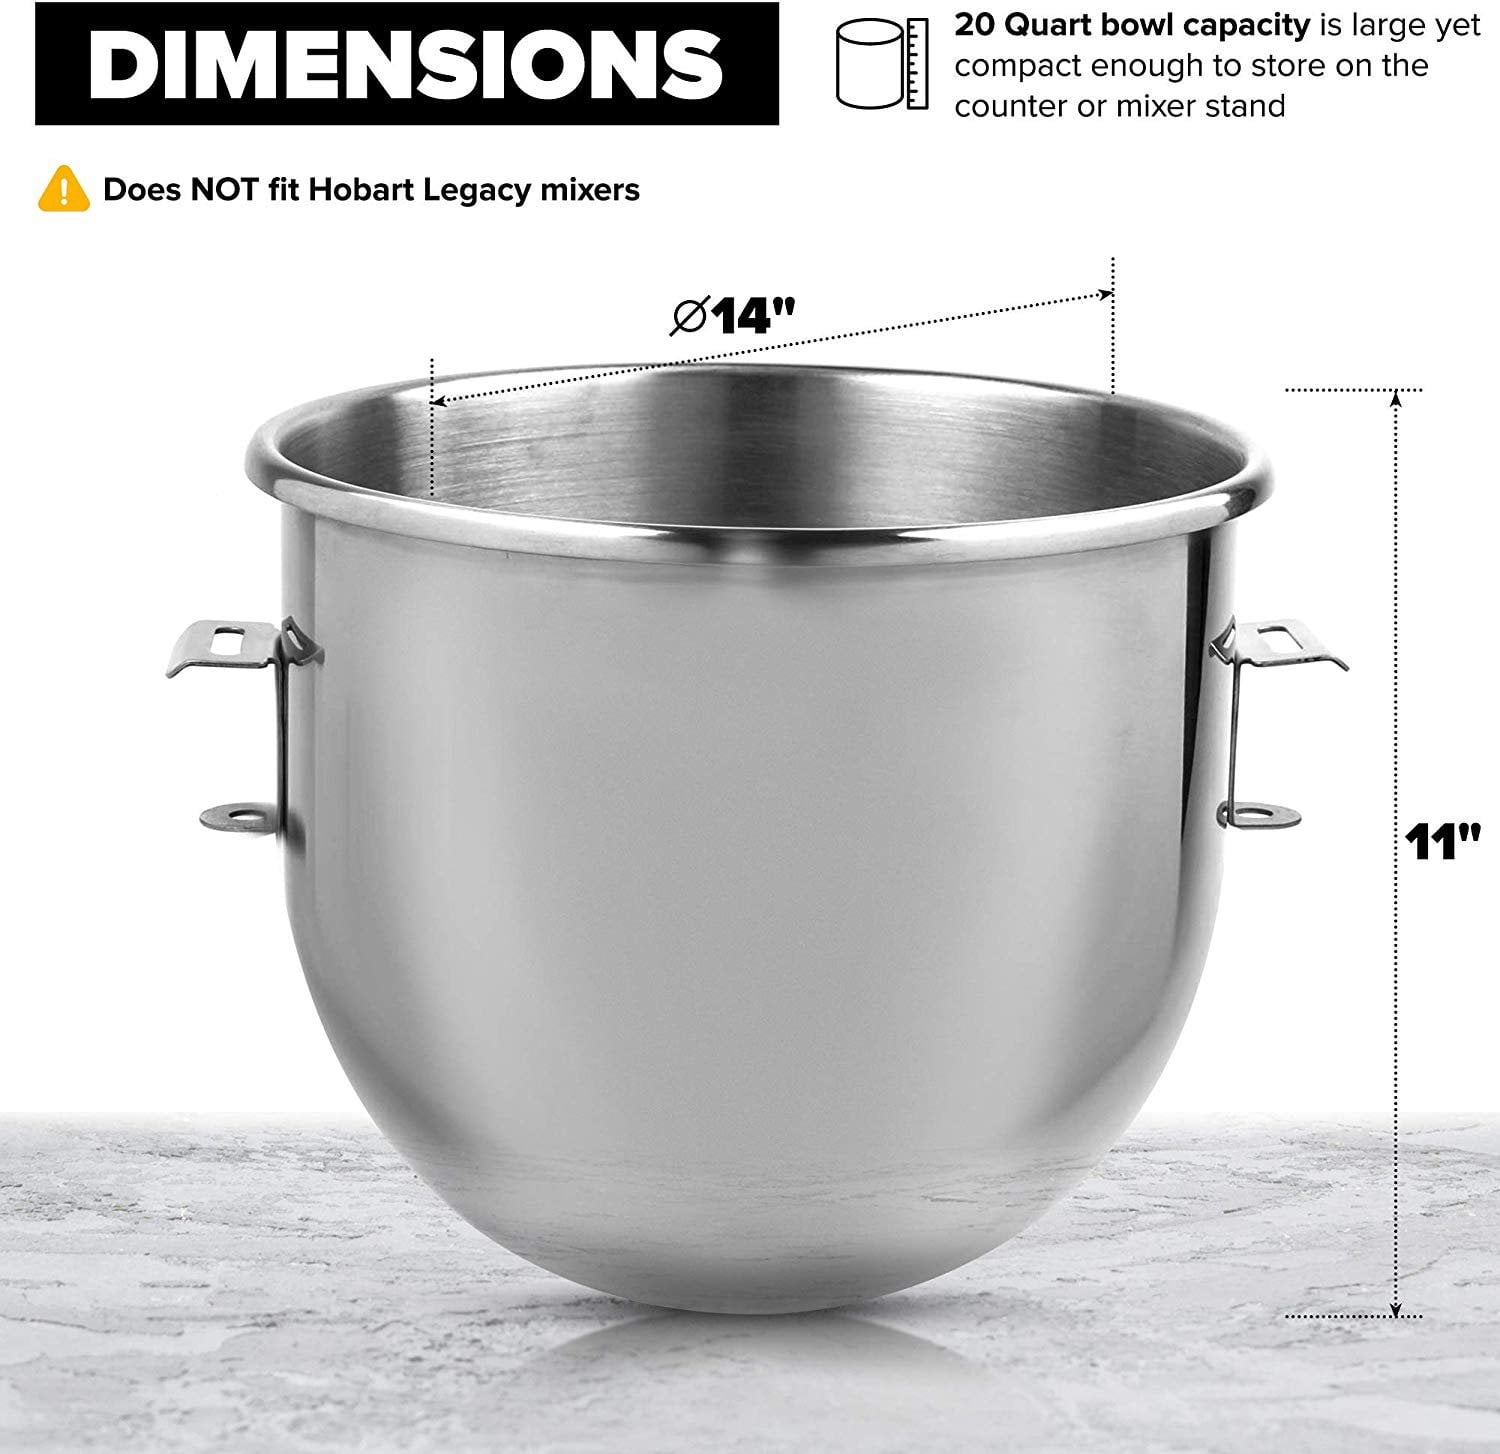 NEW 10 Qt Mixing Bowl for Hobart Mixer Stainless Steel Uniworld UPM-1B #8063 